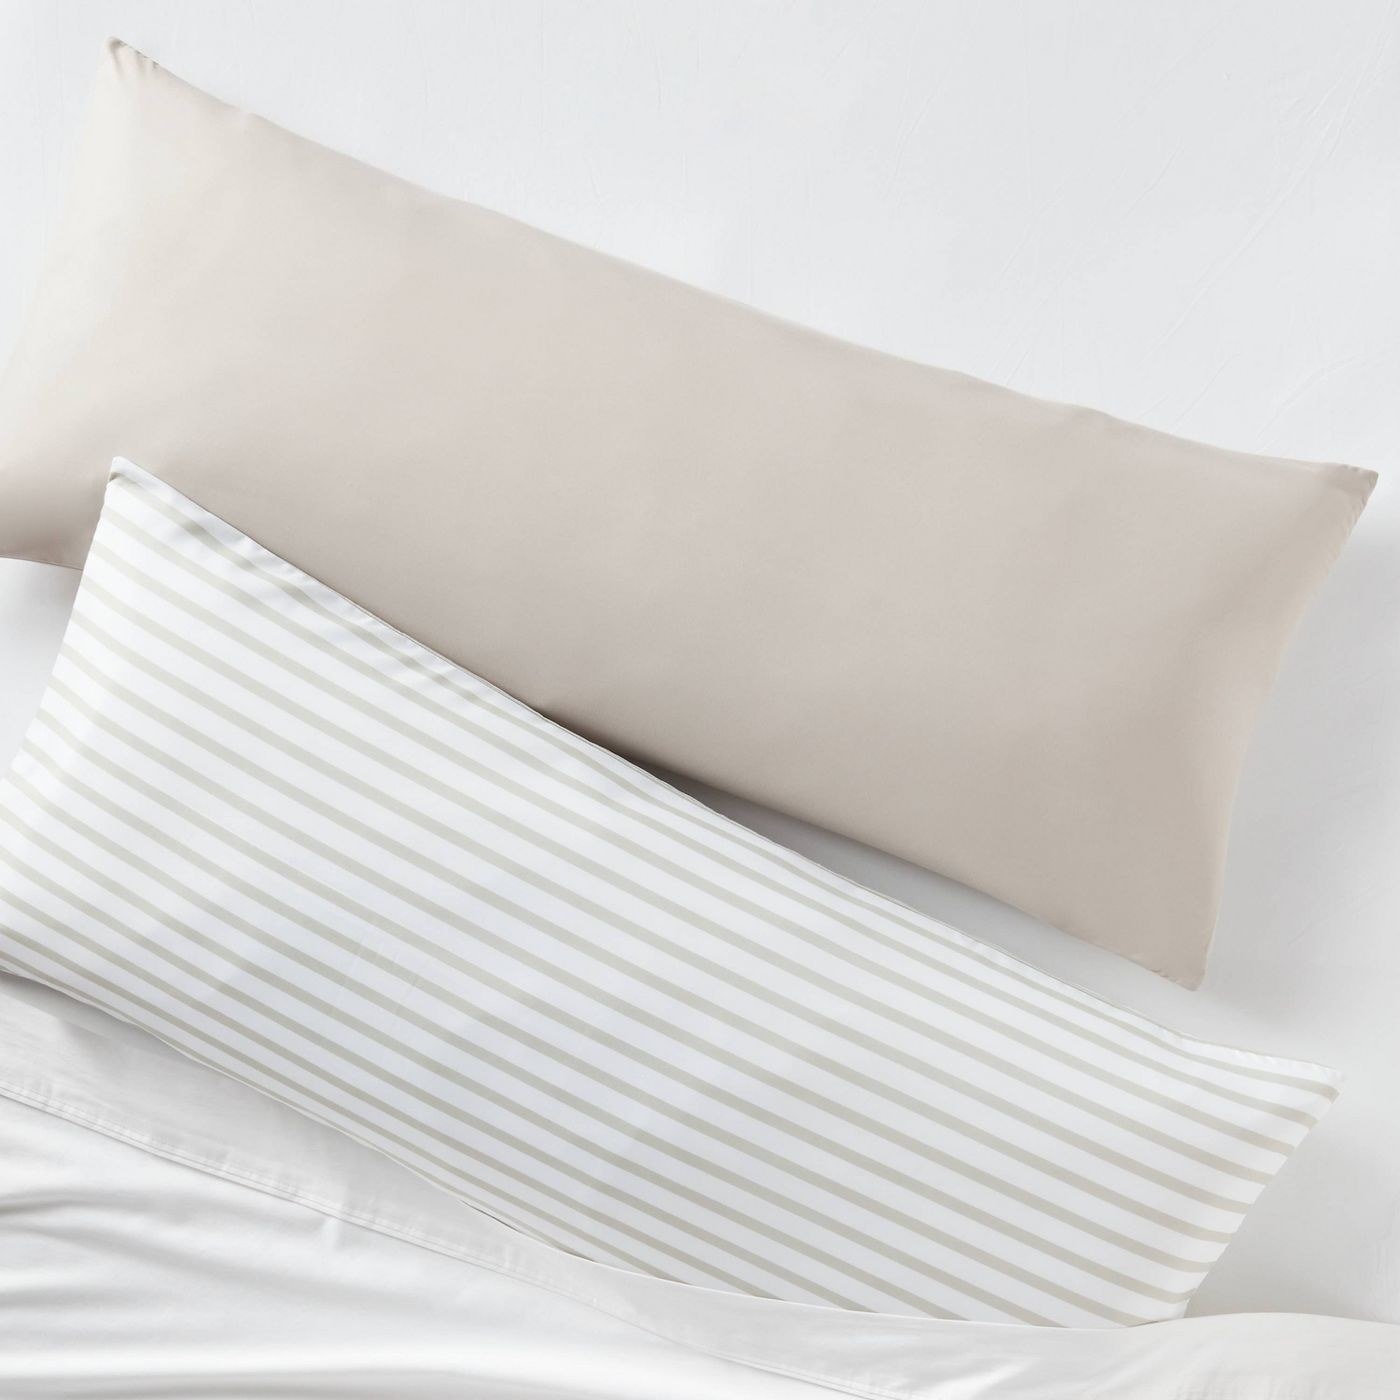 Two pillow cases, one striped and one tan